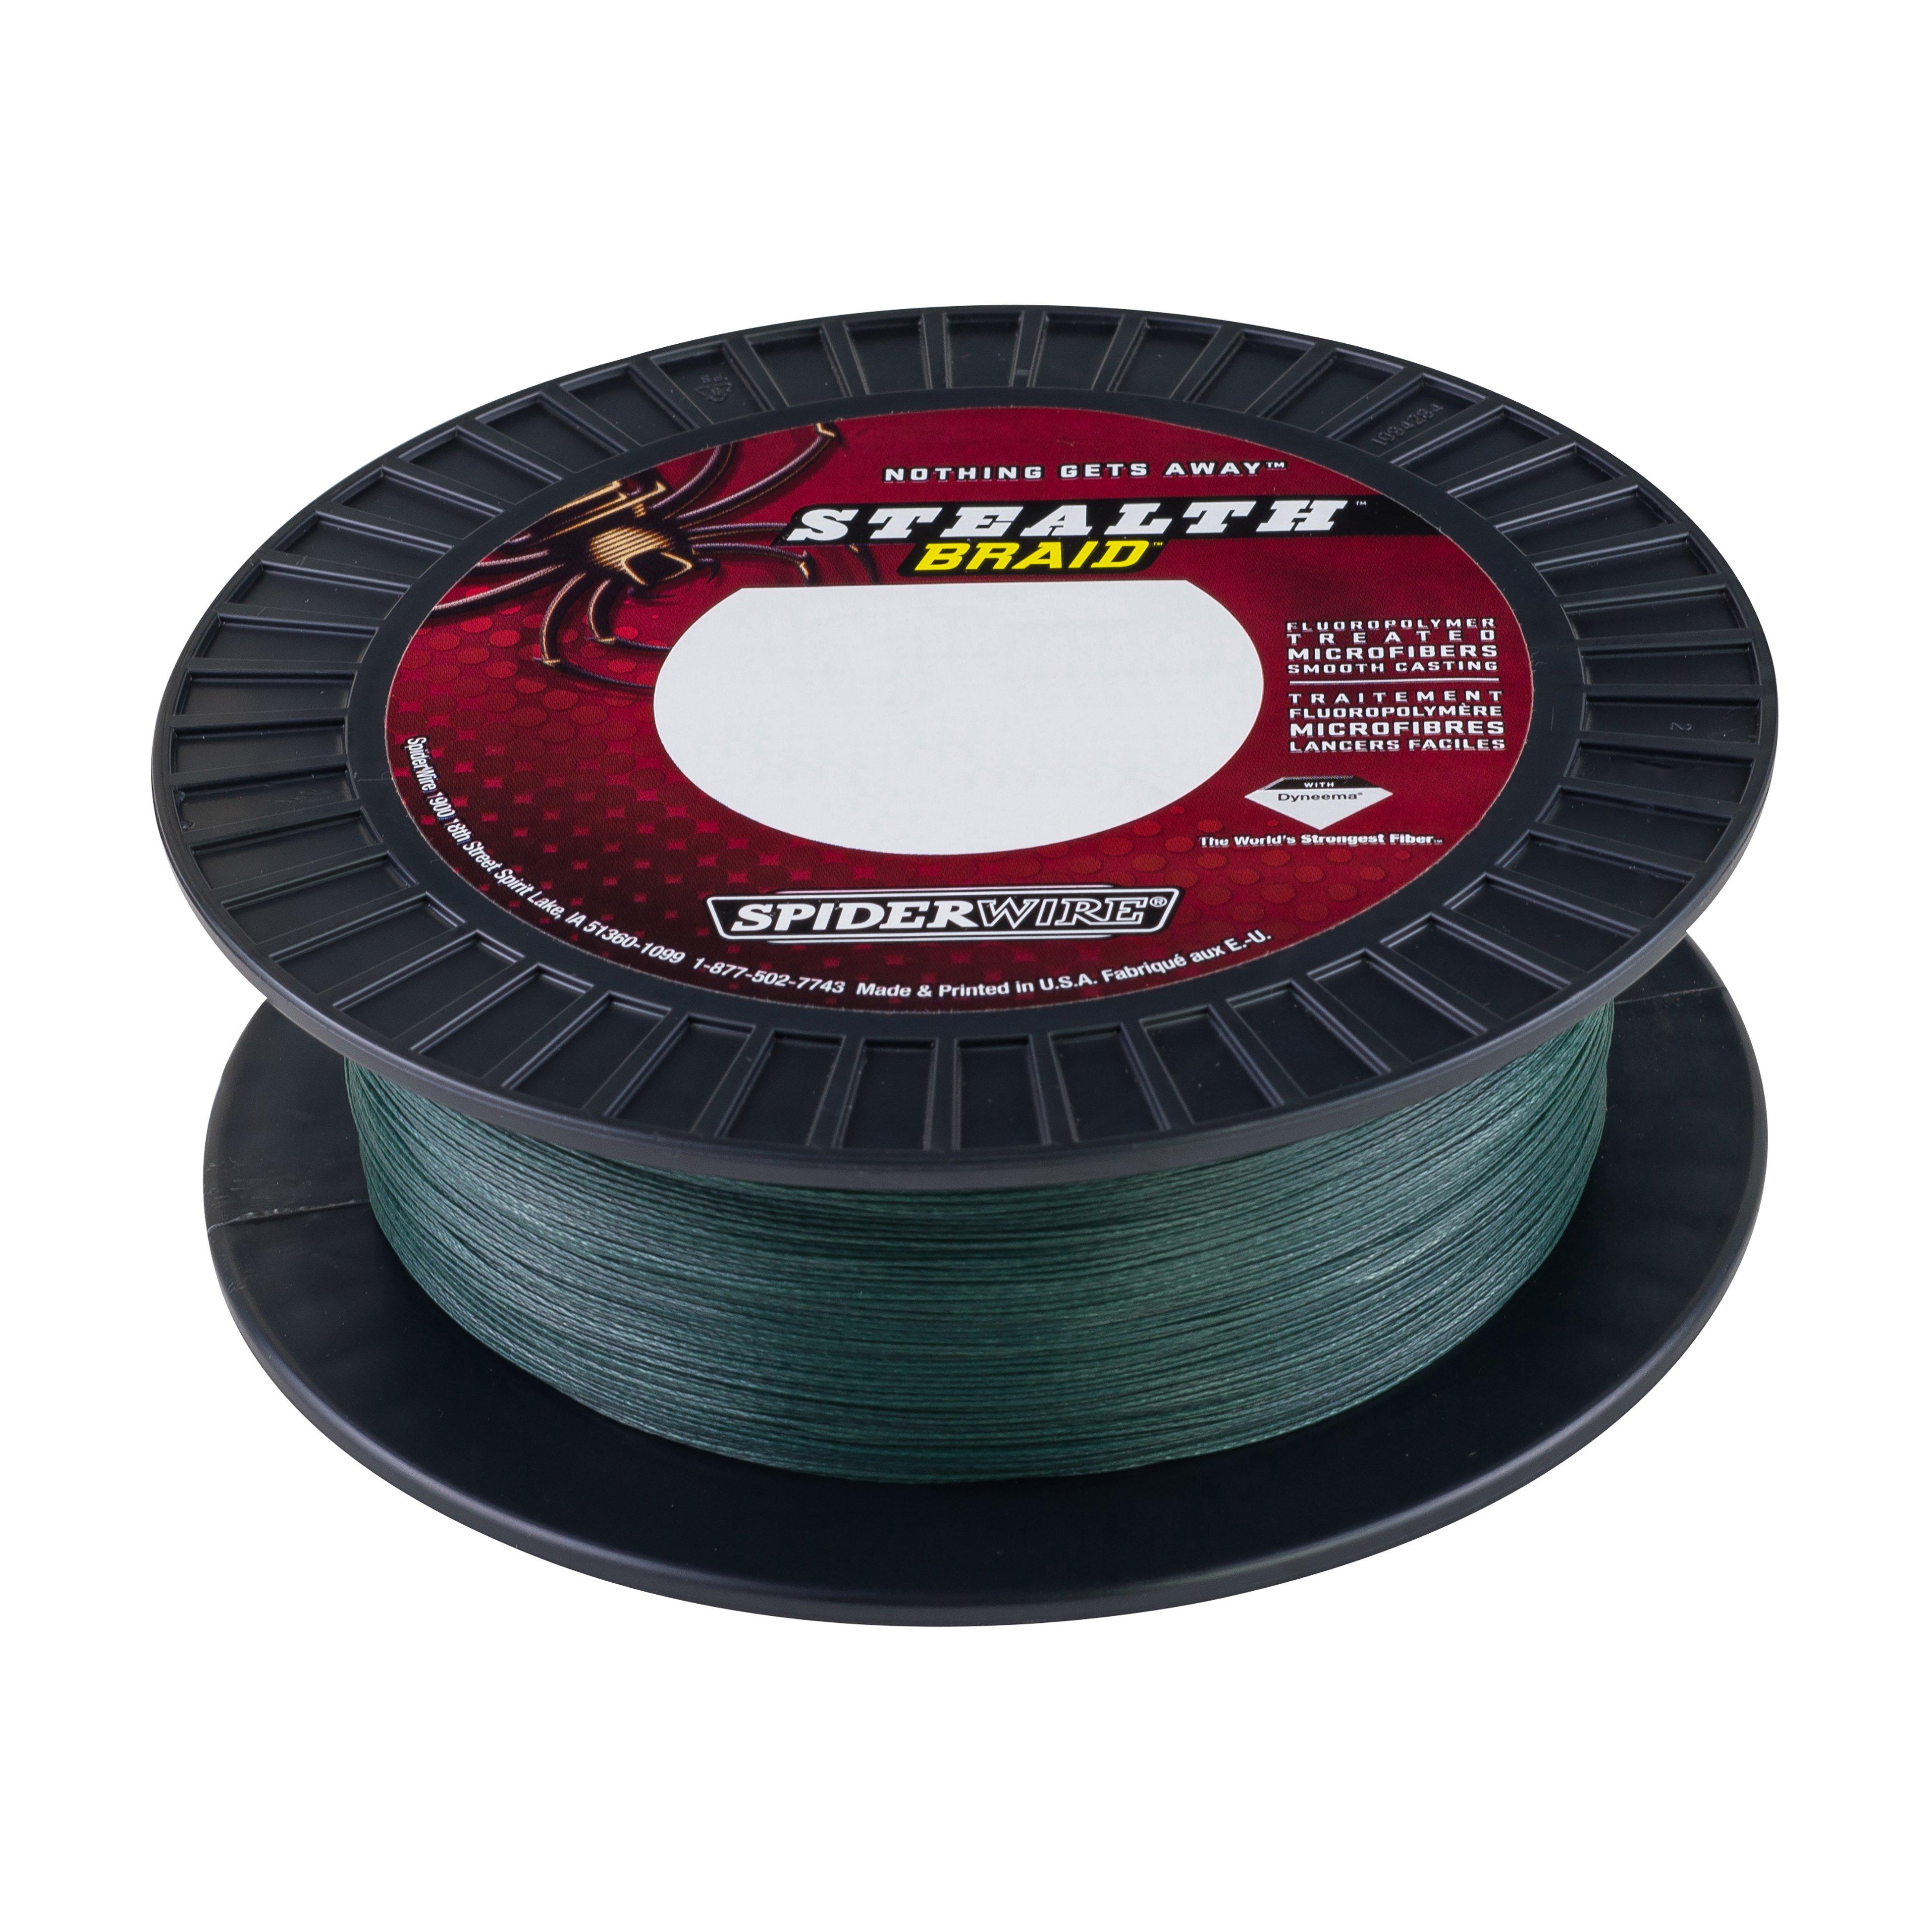 Comprar SpiderWire Stealth® Superline, Blue Camo, 20lb, 9kg, 300yd, 274m Braided  Fishing Line, Suitable for Saltwater and Freshwater Environments en USA  desde Costa Rica